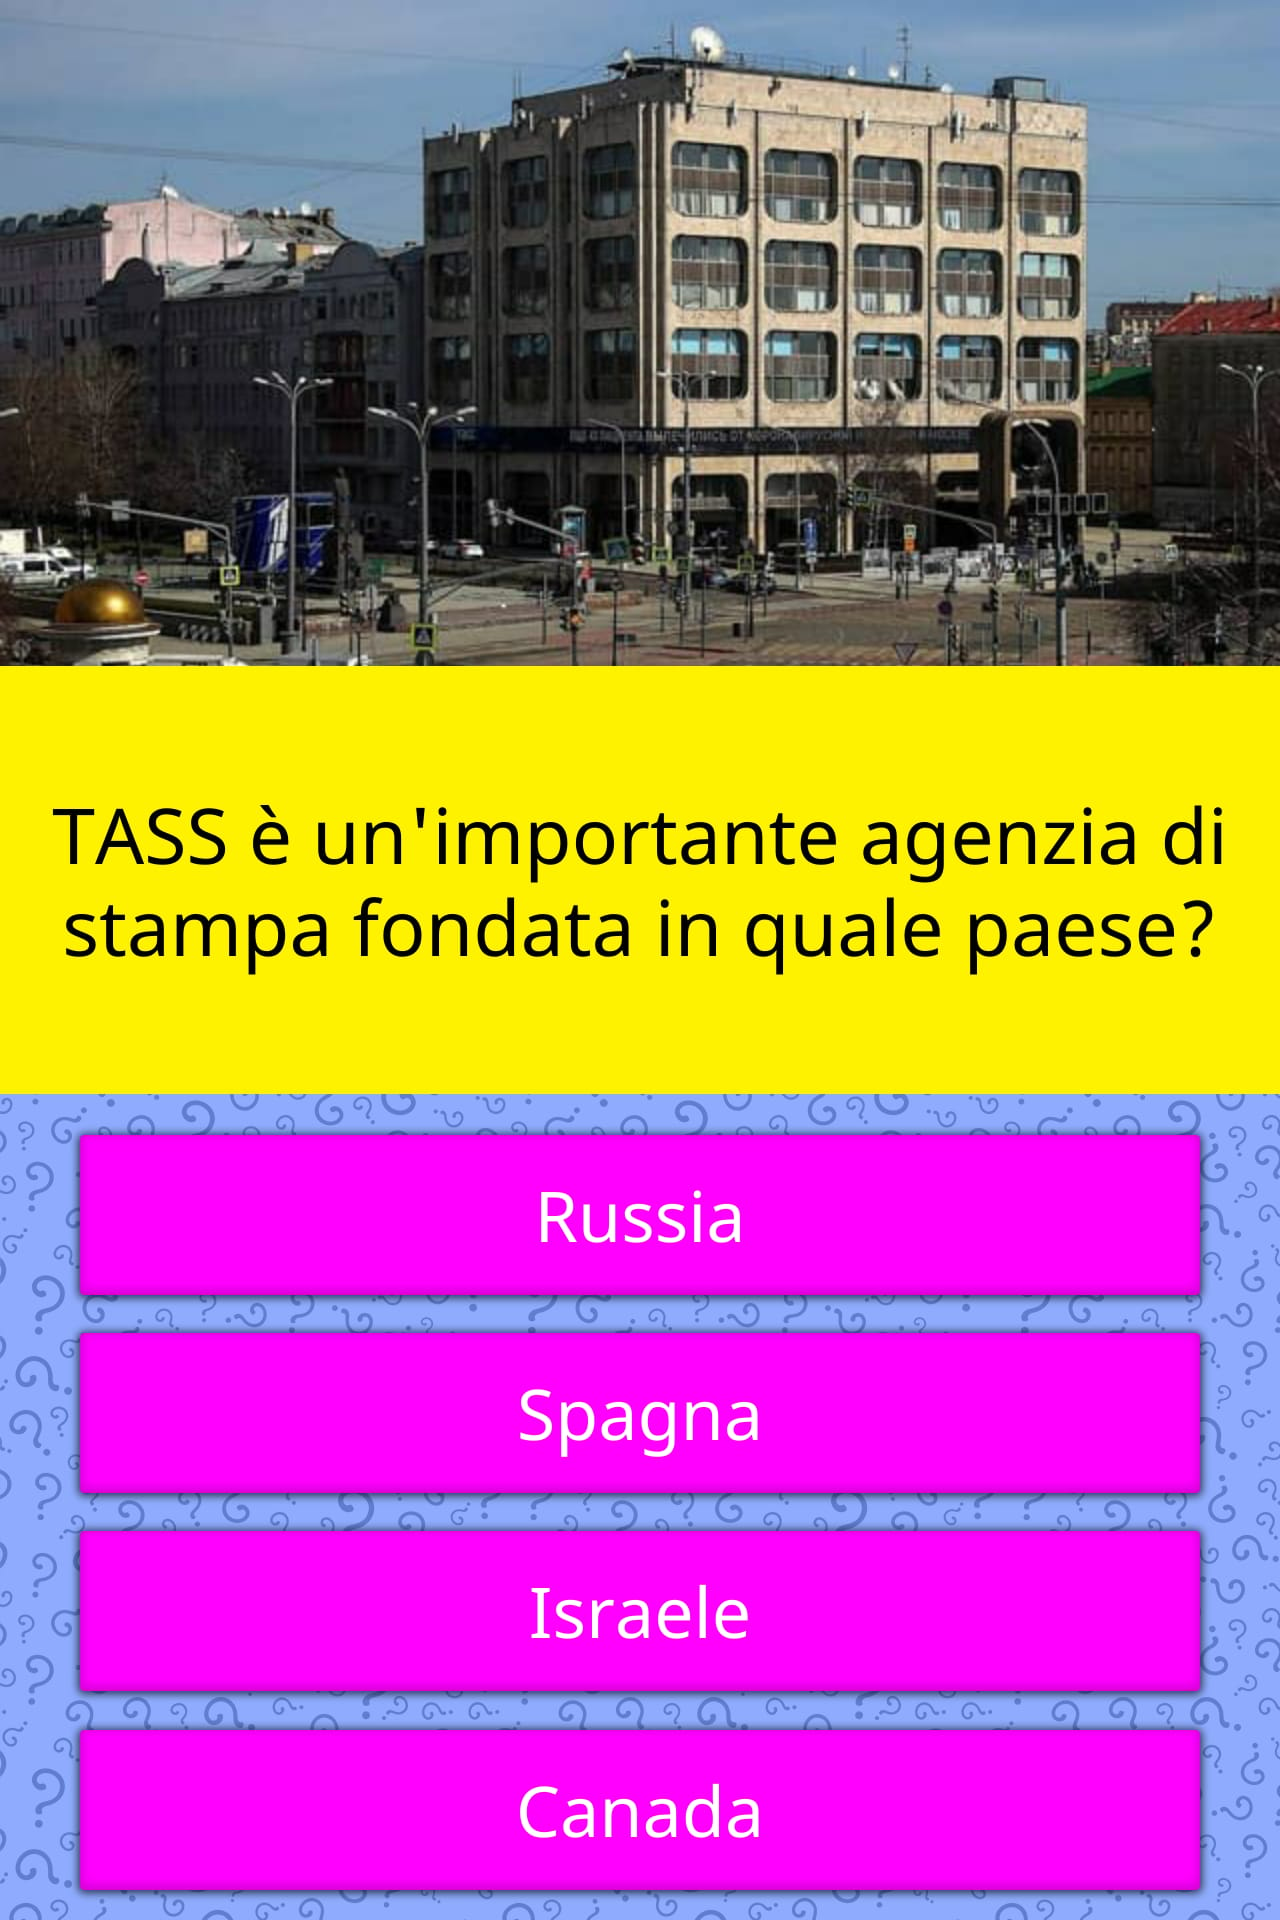 Tass Is A Major News Agency Founded Trivia Answers Quizzclub